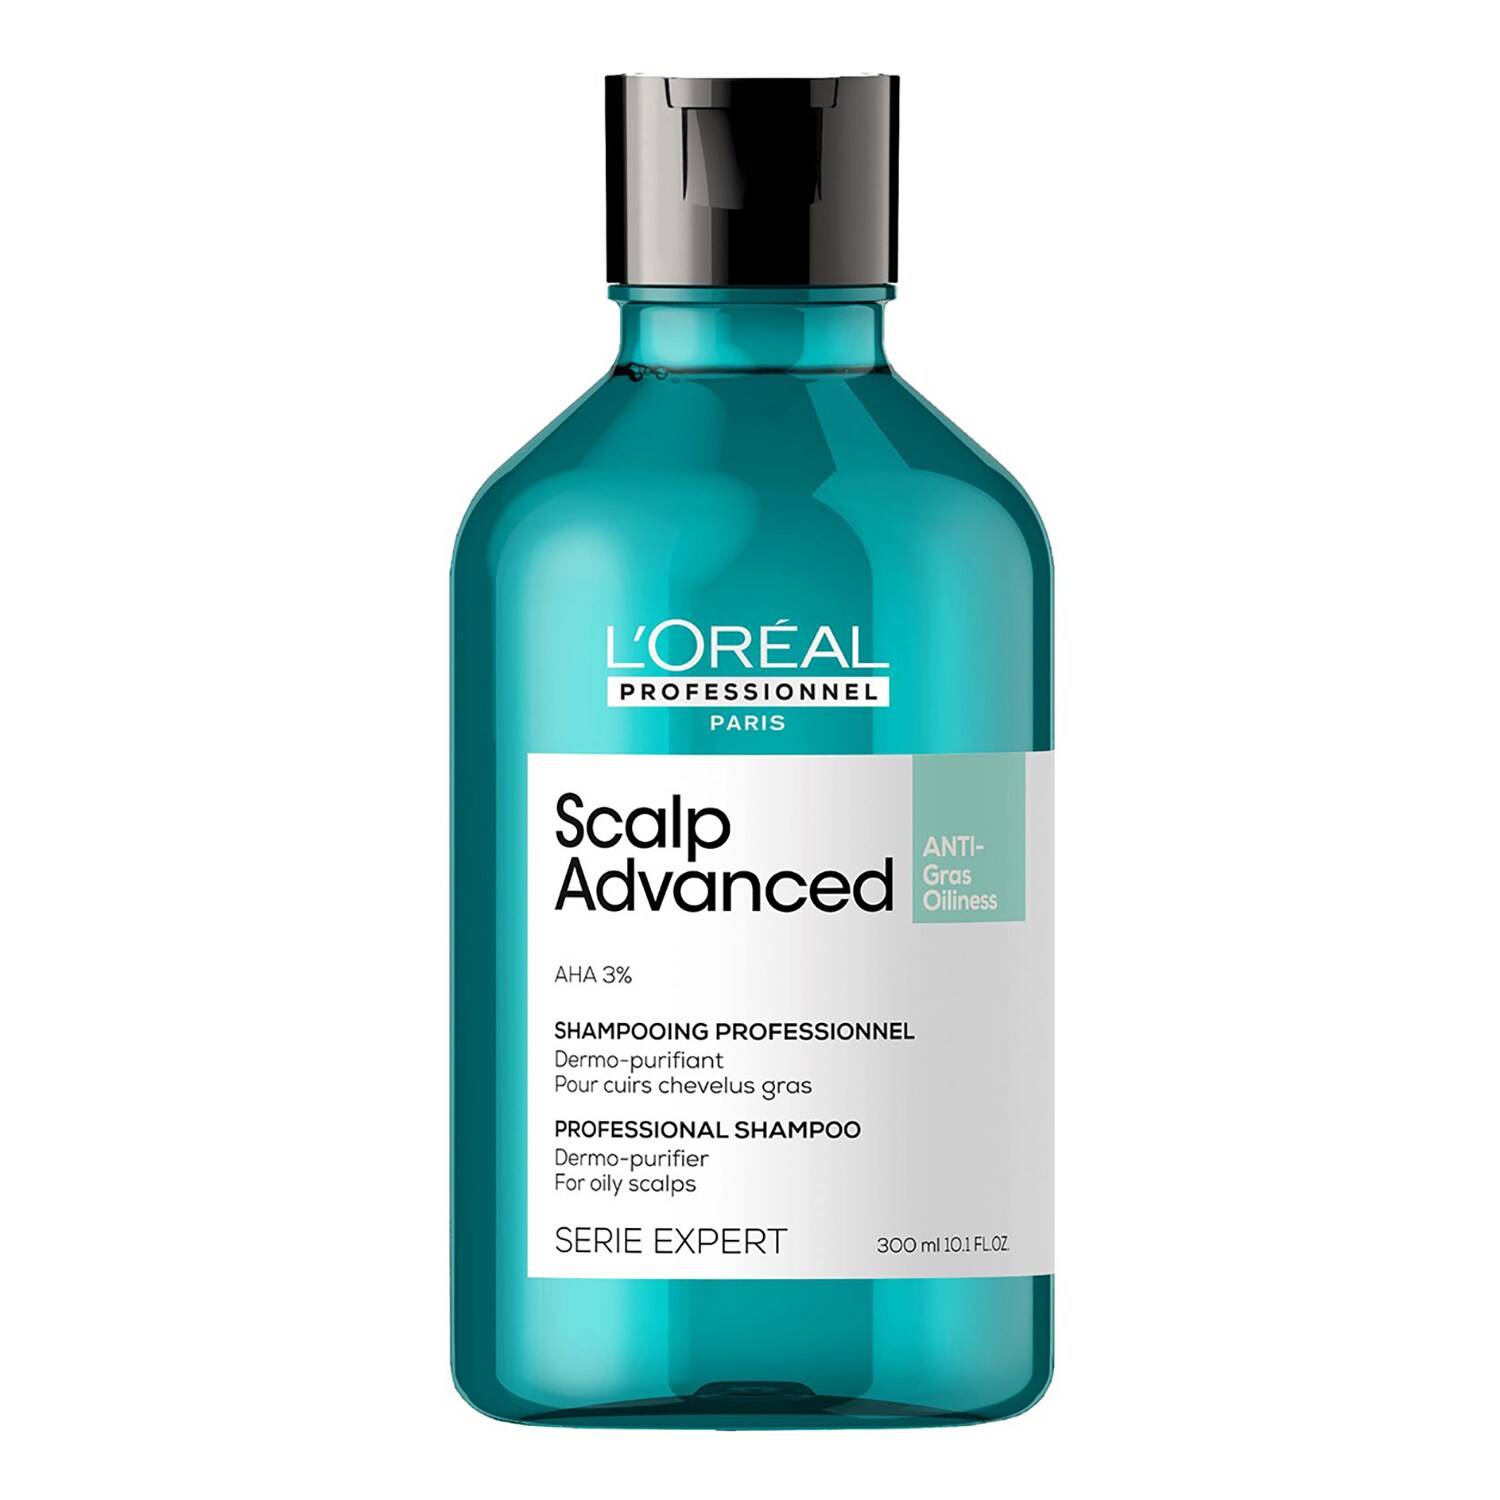 L'Oreal Professionnel Serie Expert Scalp Advanced Anti-Oiliness 2-In-1 Deep Purifier Clay Hair Mask 